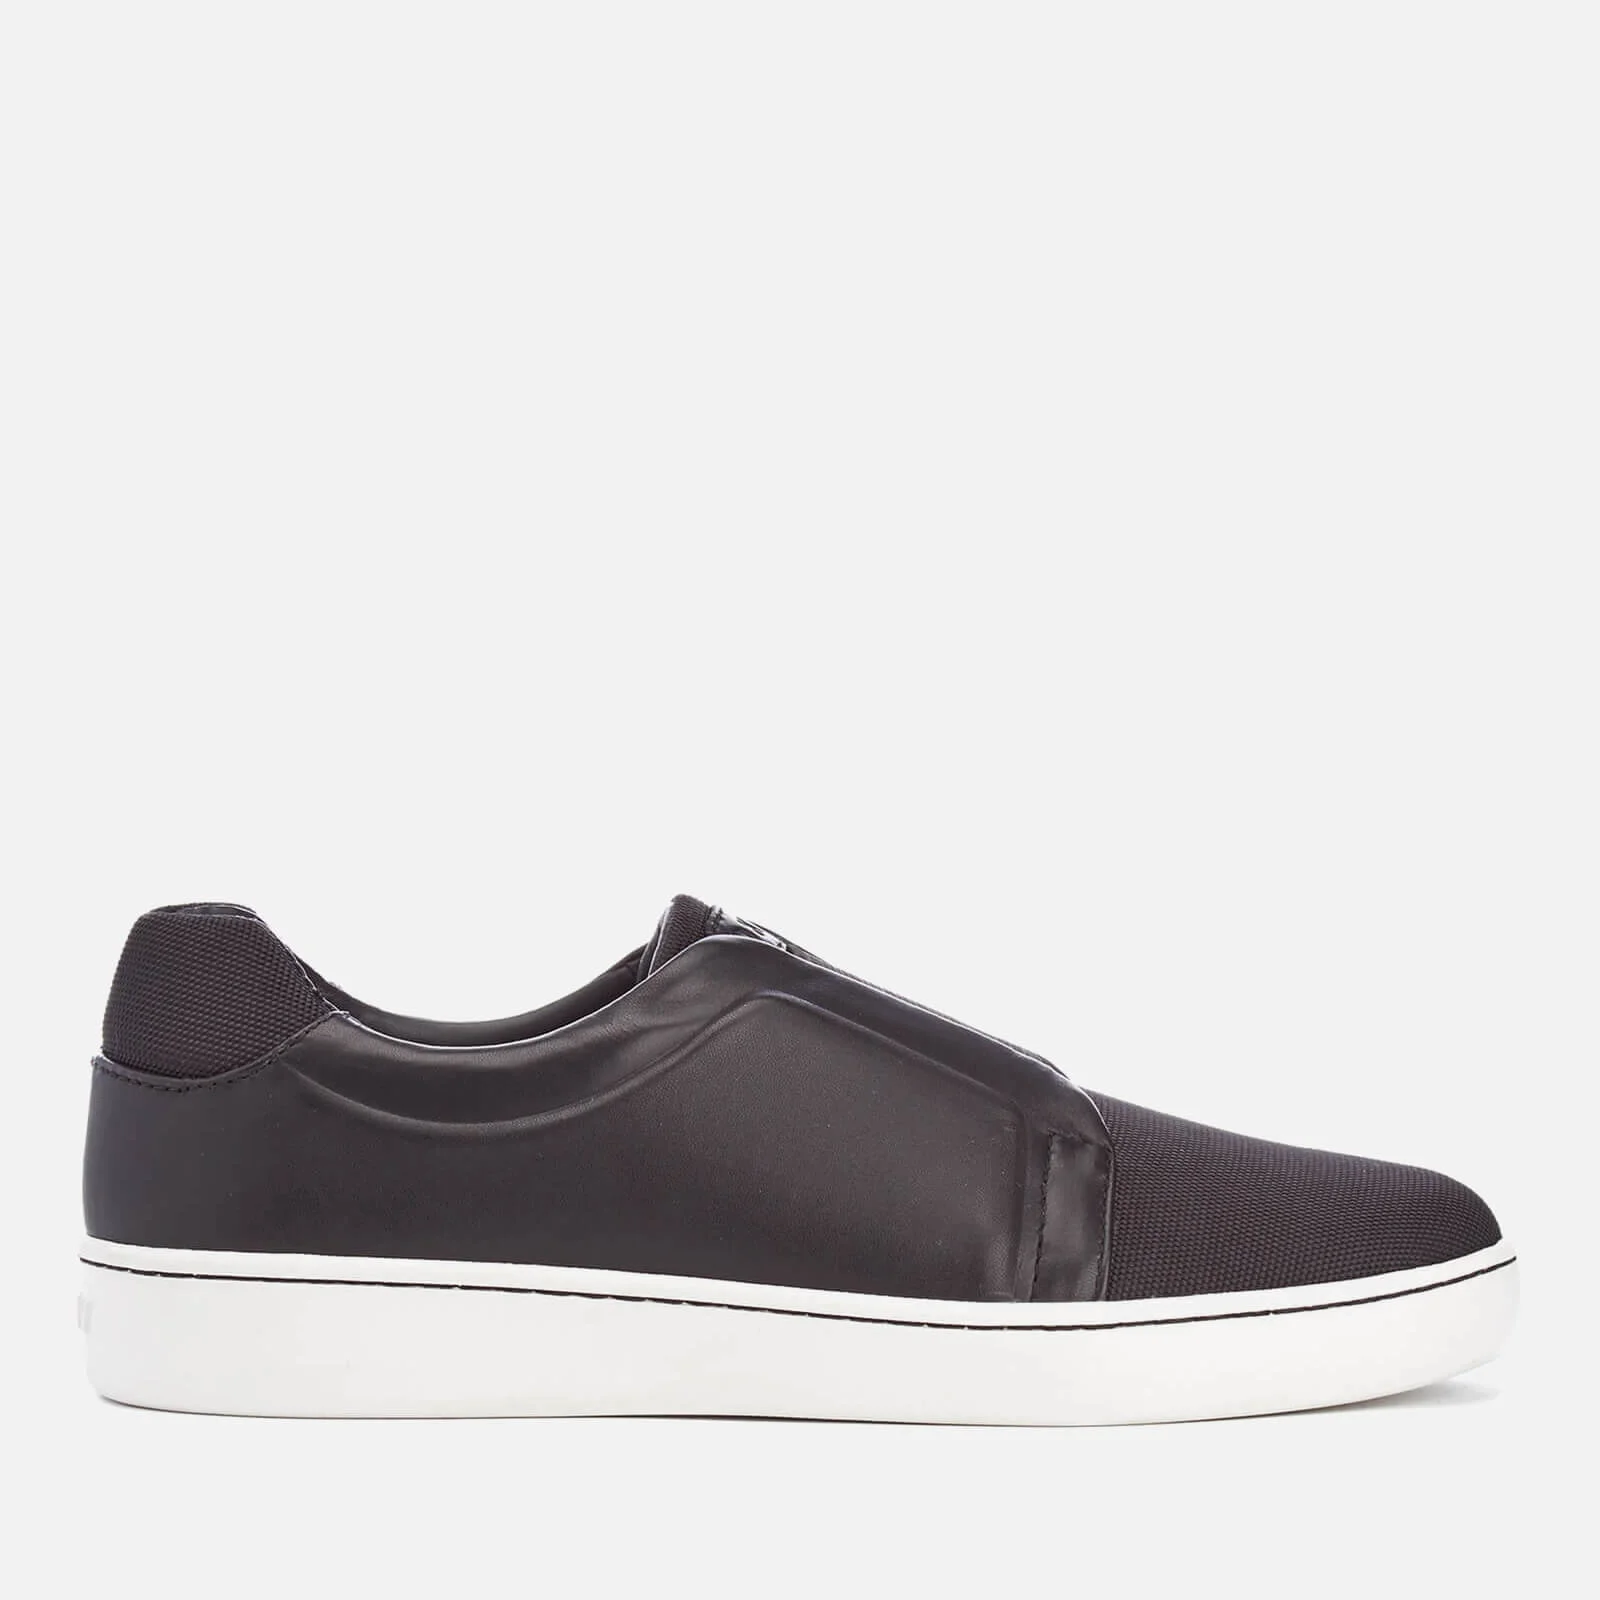 DKNY Women's Bobby Classic Court Slip On Trainers - Black Image 1